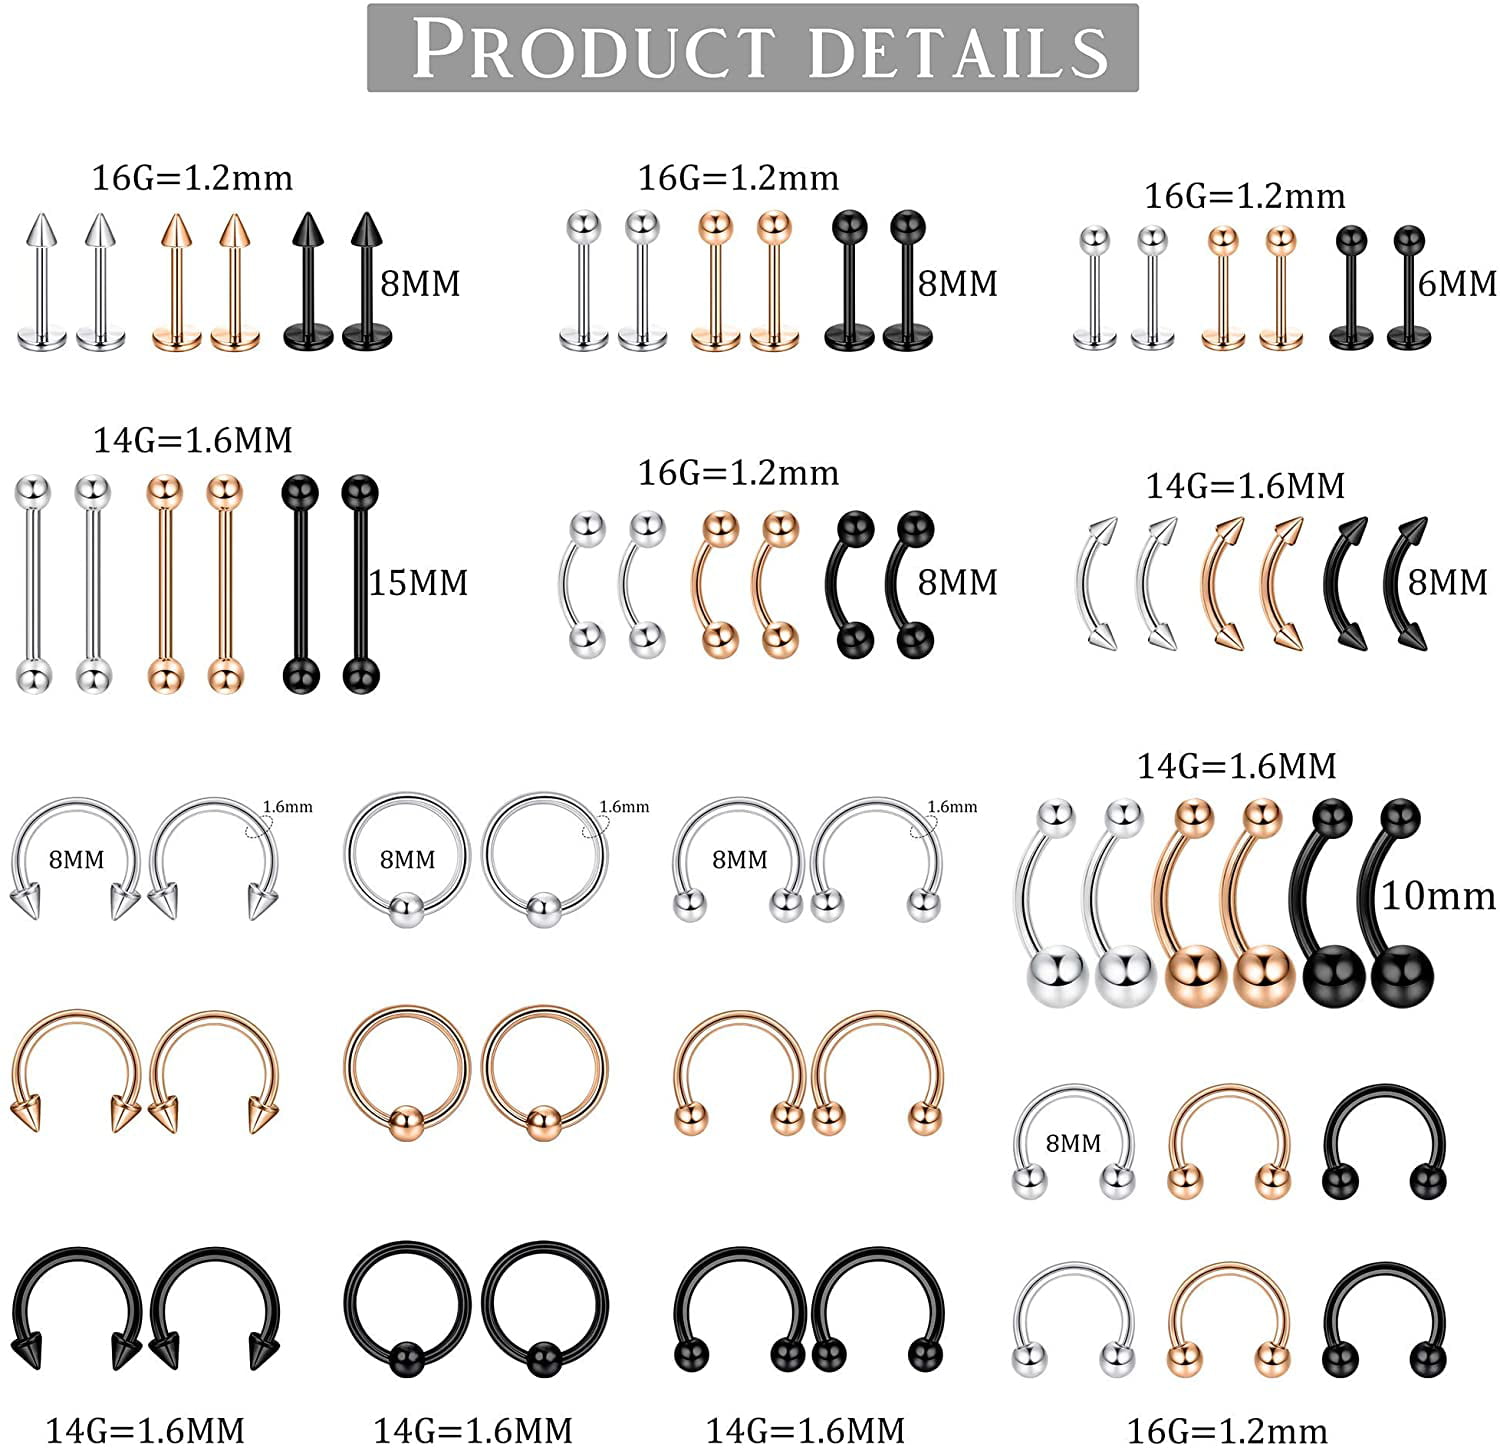 Thunaraz 82 Pcs Professional Piercing Kit Stainless Steel 14G 16G Belly Tongue Tragus Cartilage Nipple Lip Nose Ring Body Jewelry 